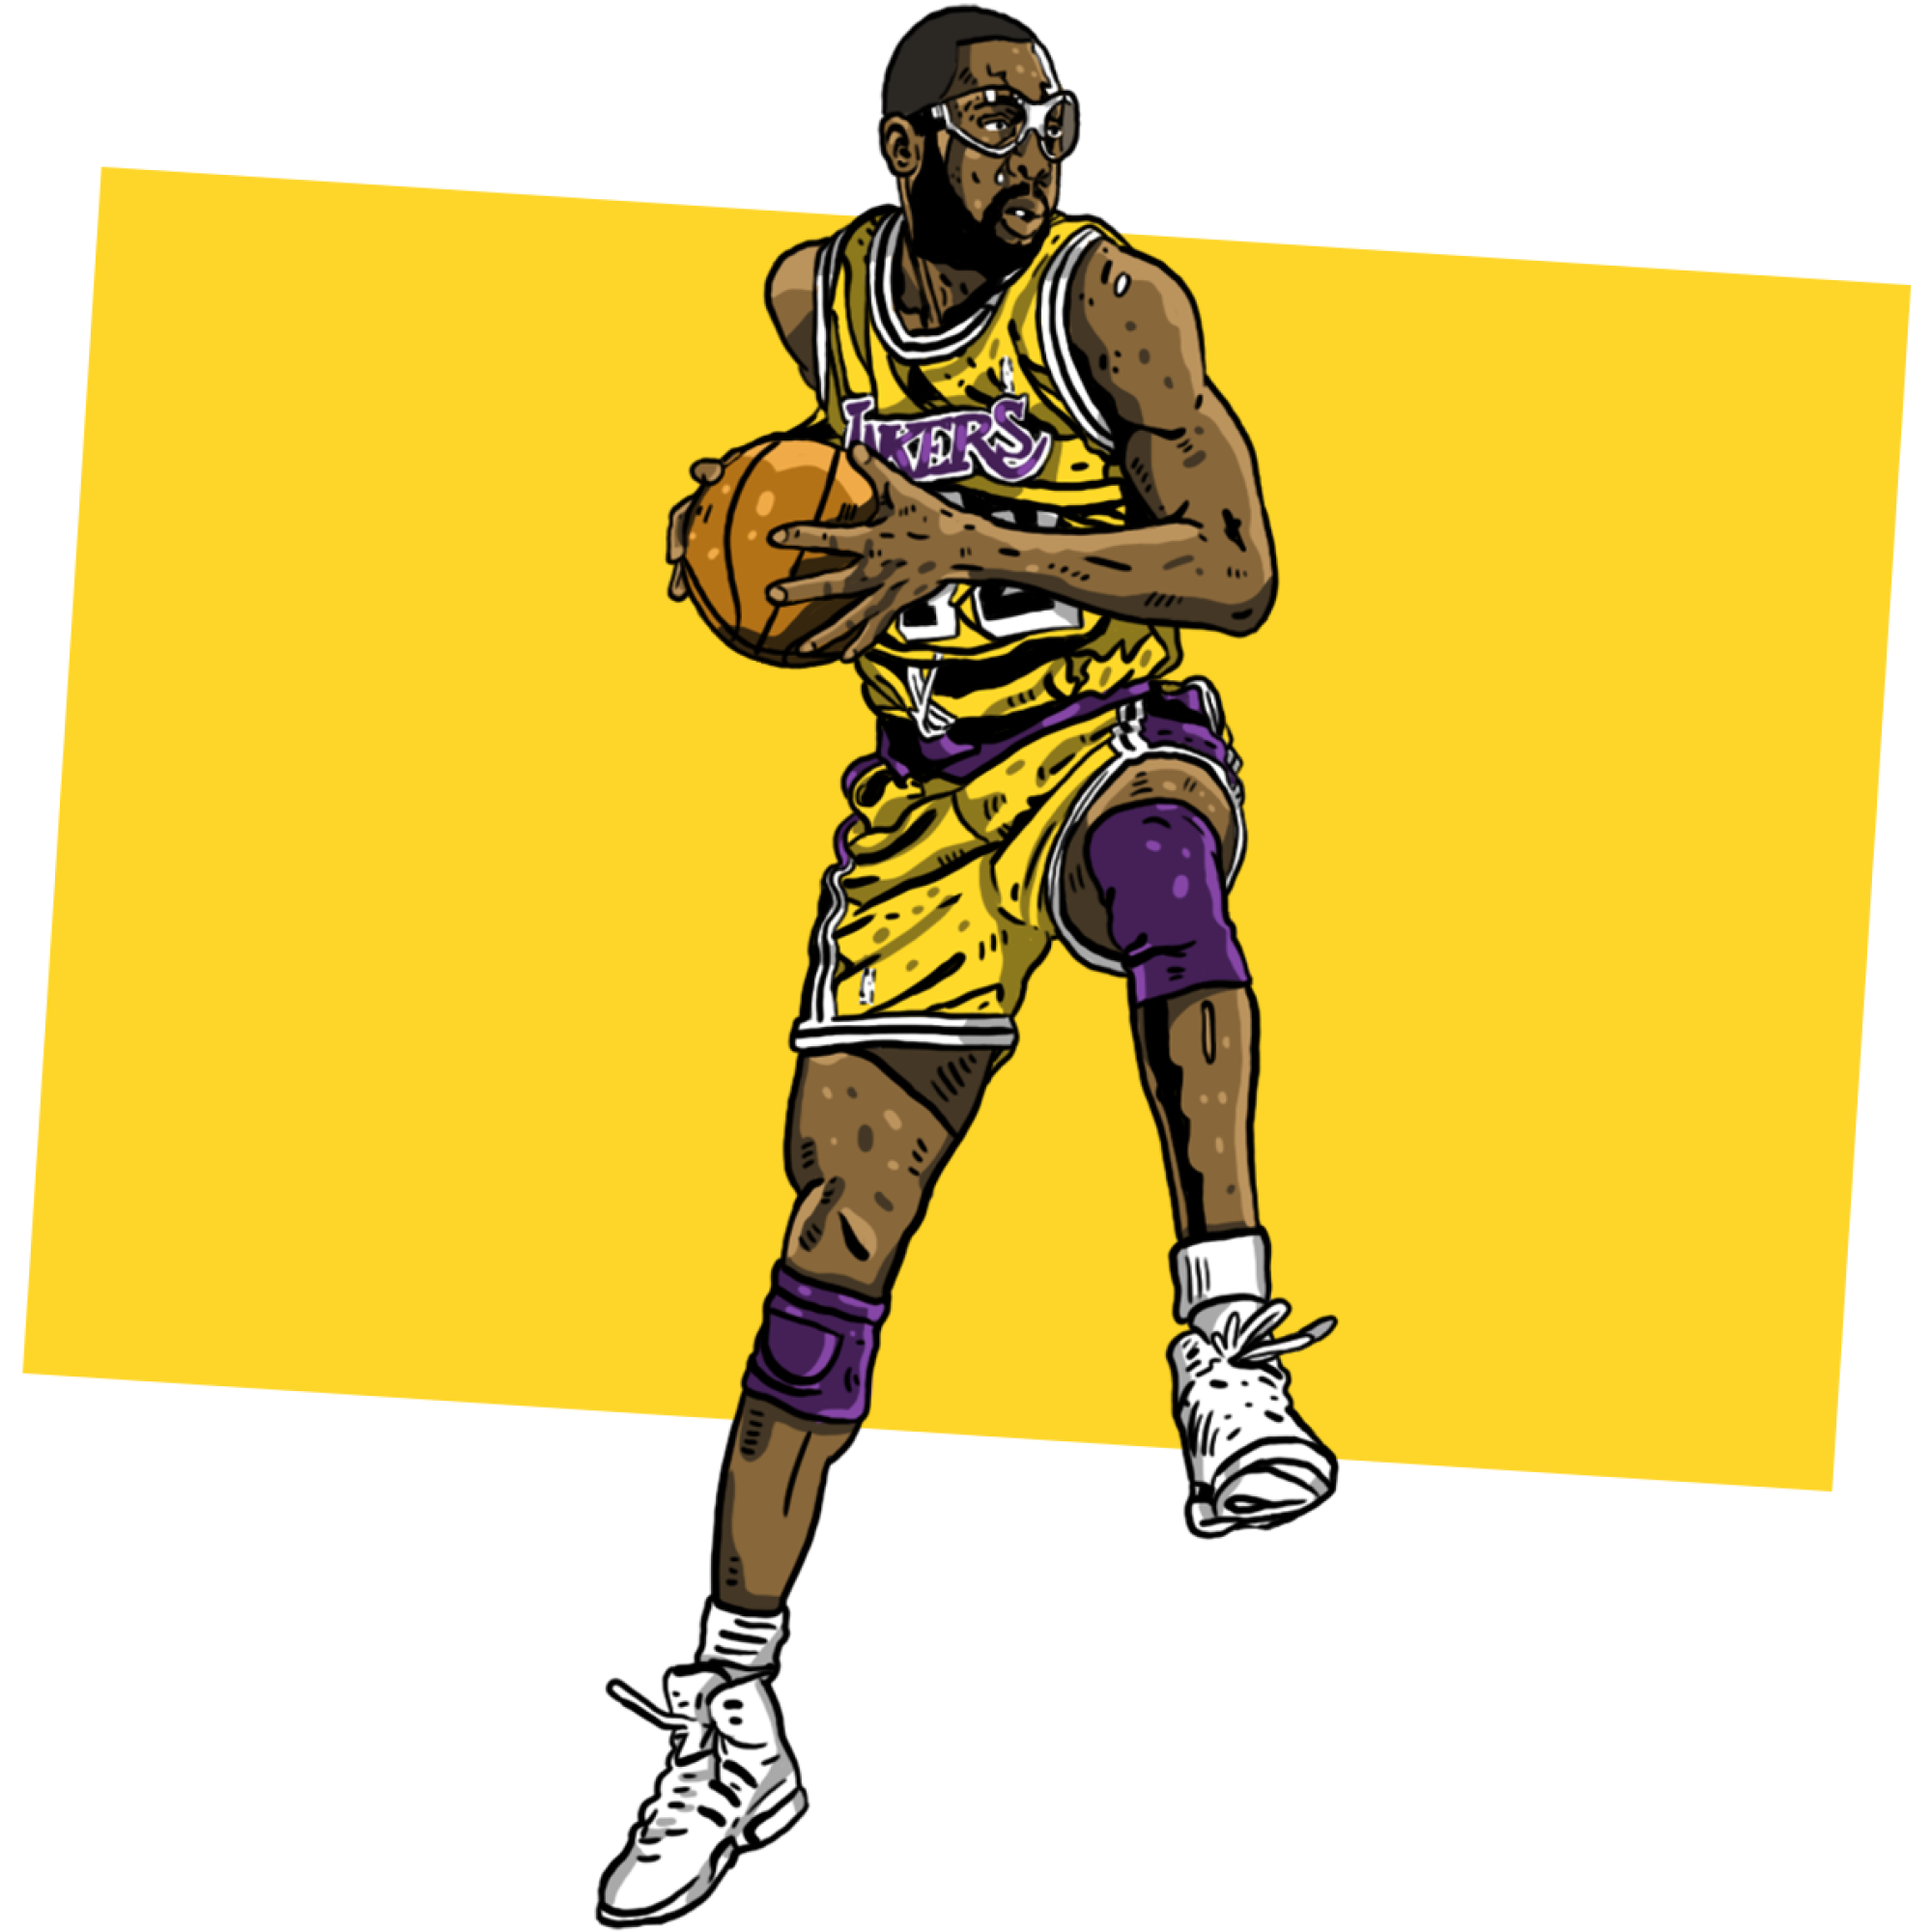 Illustration of James Worthy in a yellow jersey jumping up with a ball in both hands.